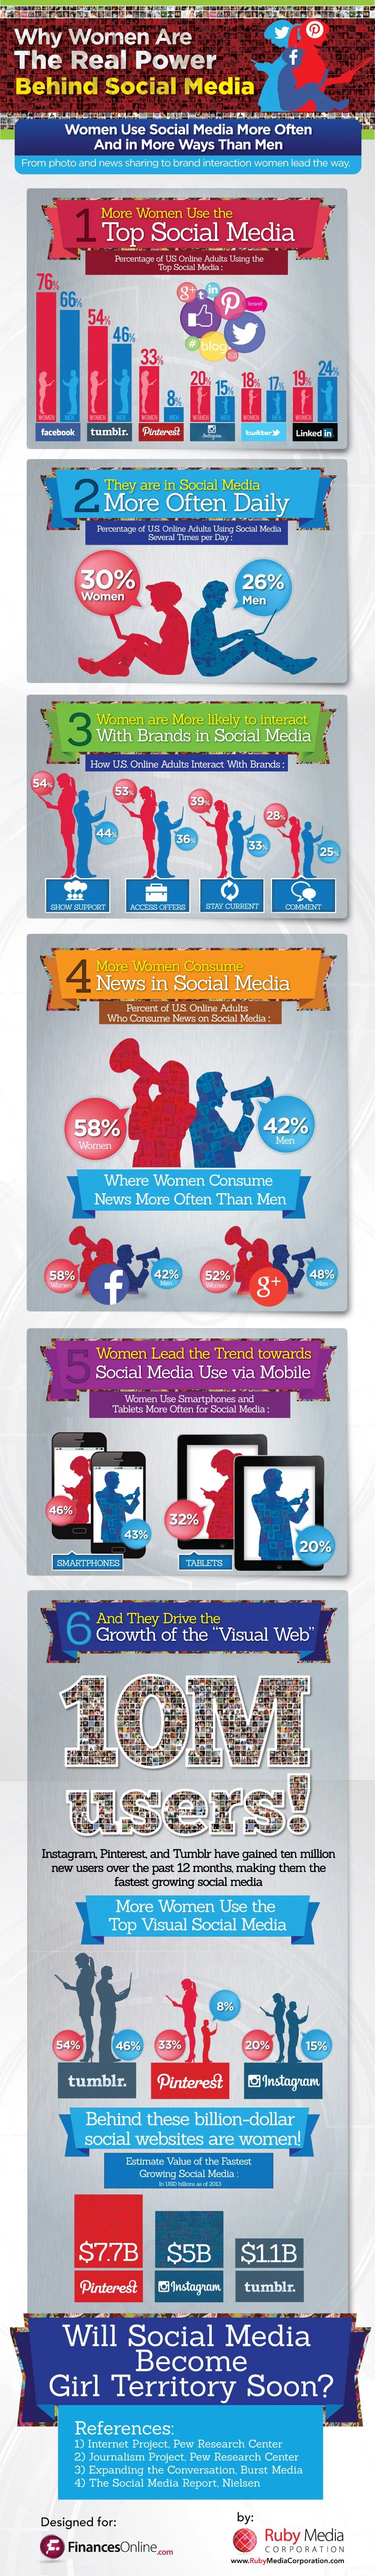 1393972619 women dominate every social media network except one infographic